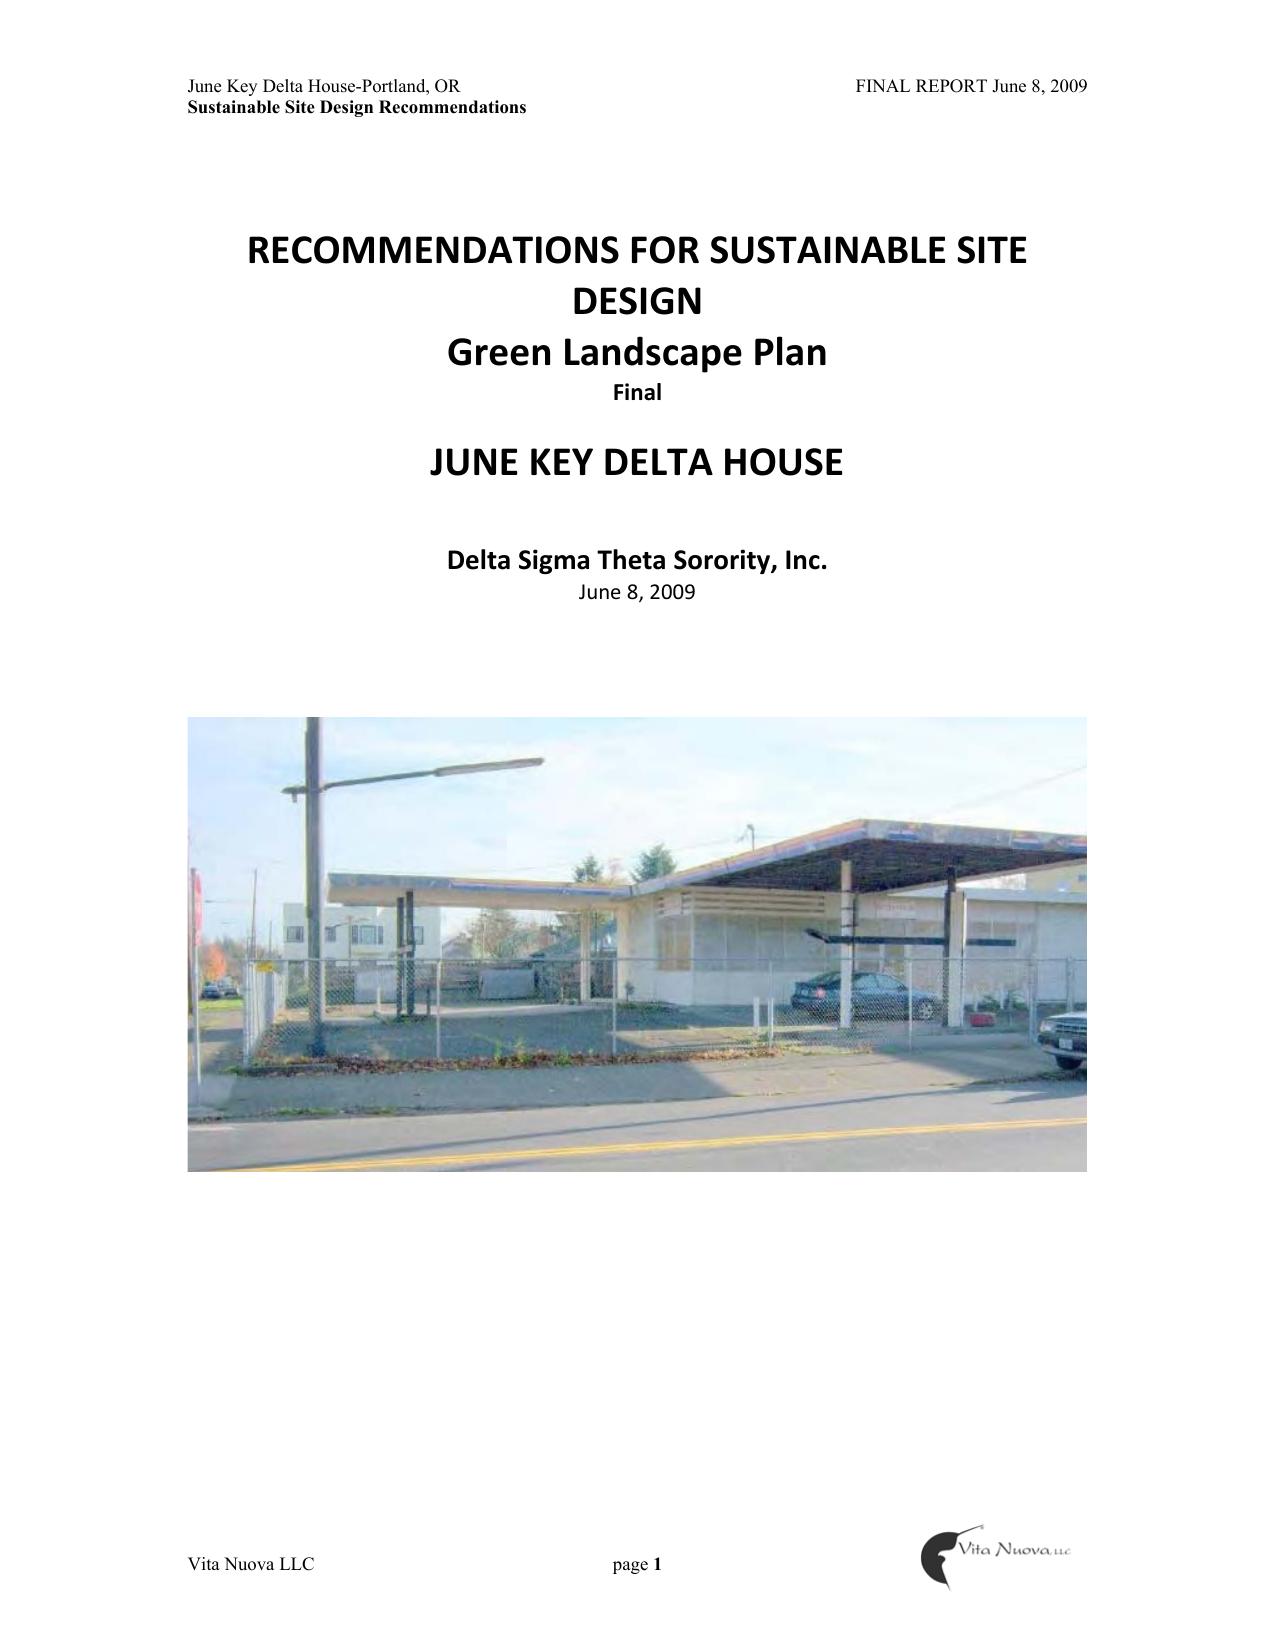 RECOMMENDATIONS FOR SUSTAINABLE SITE DESIGN, Green Landscape Plan Final, JUNE KEY DELTA HOUSE